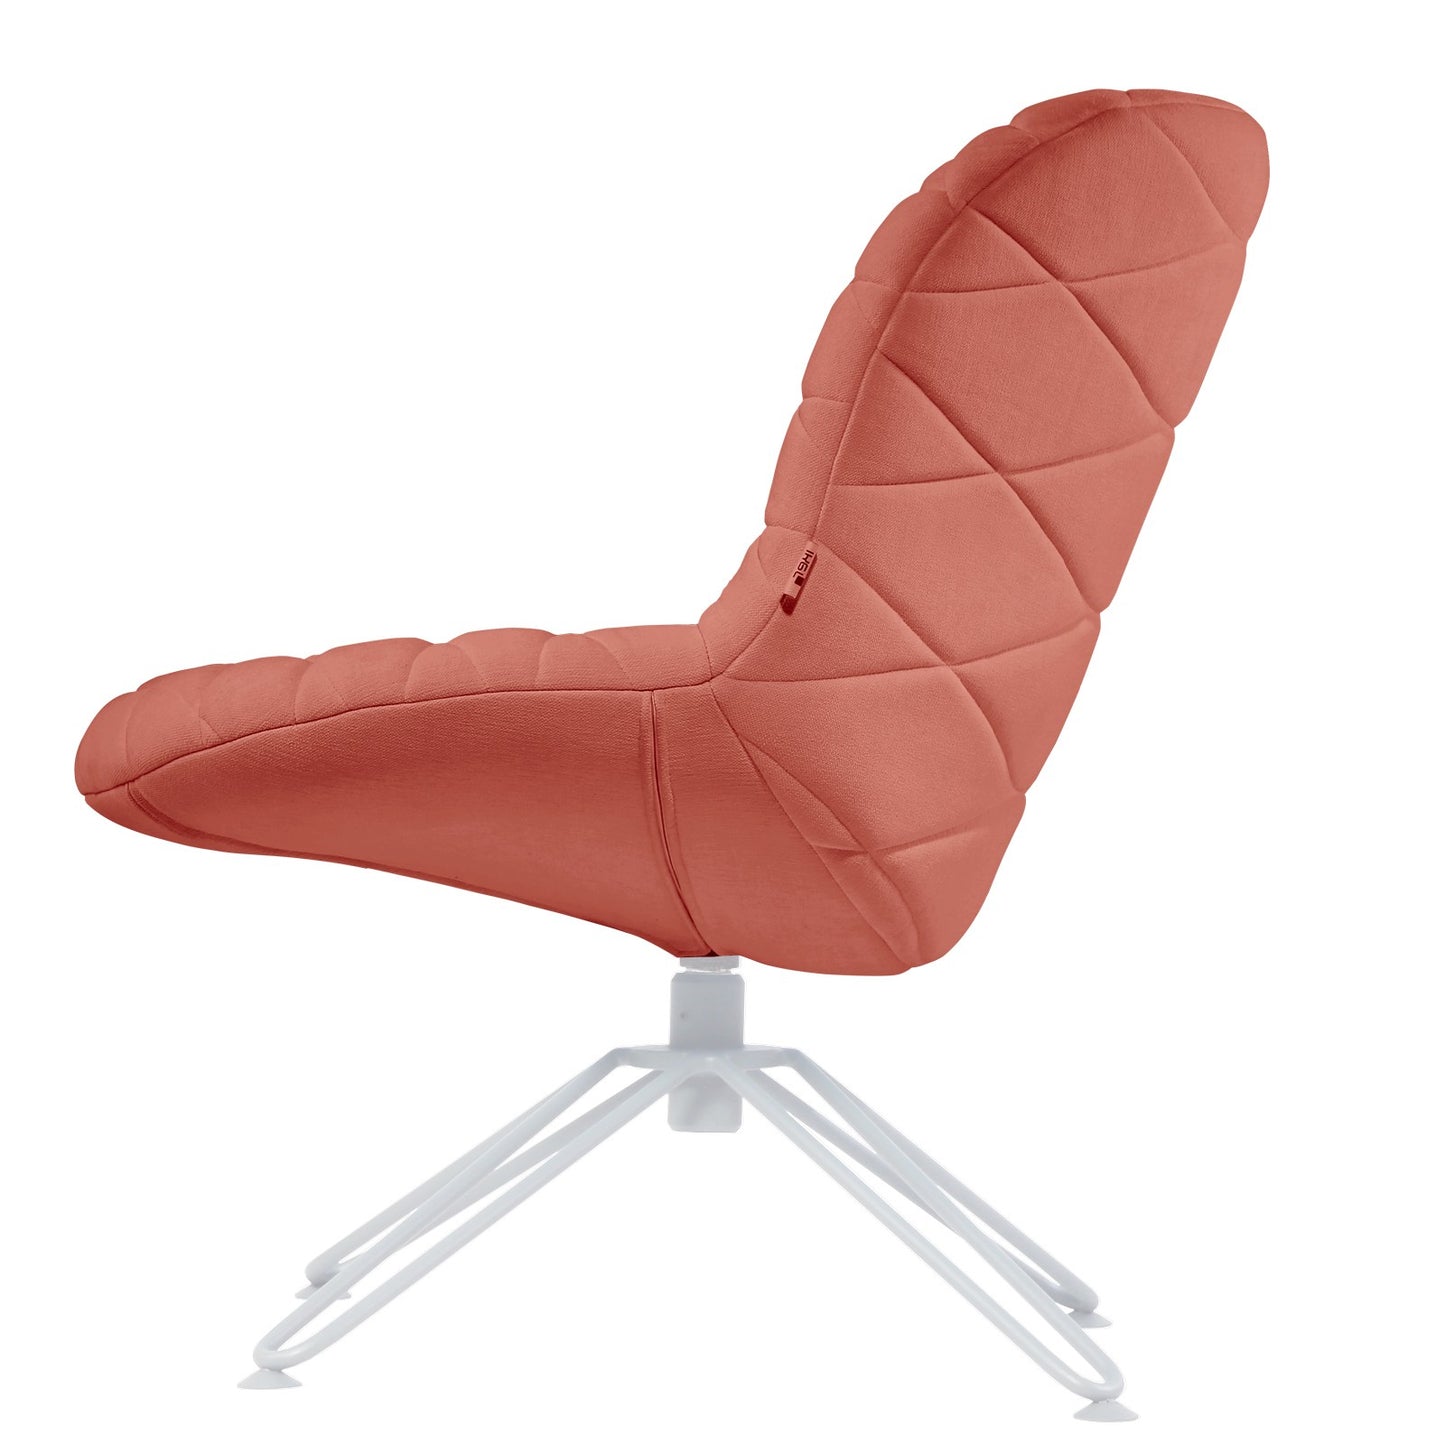 Lounge chair Mannequin Lounge 03 - Coral